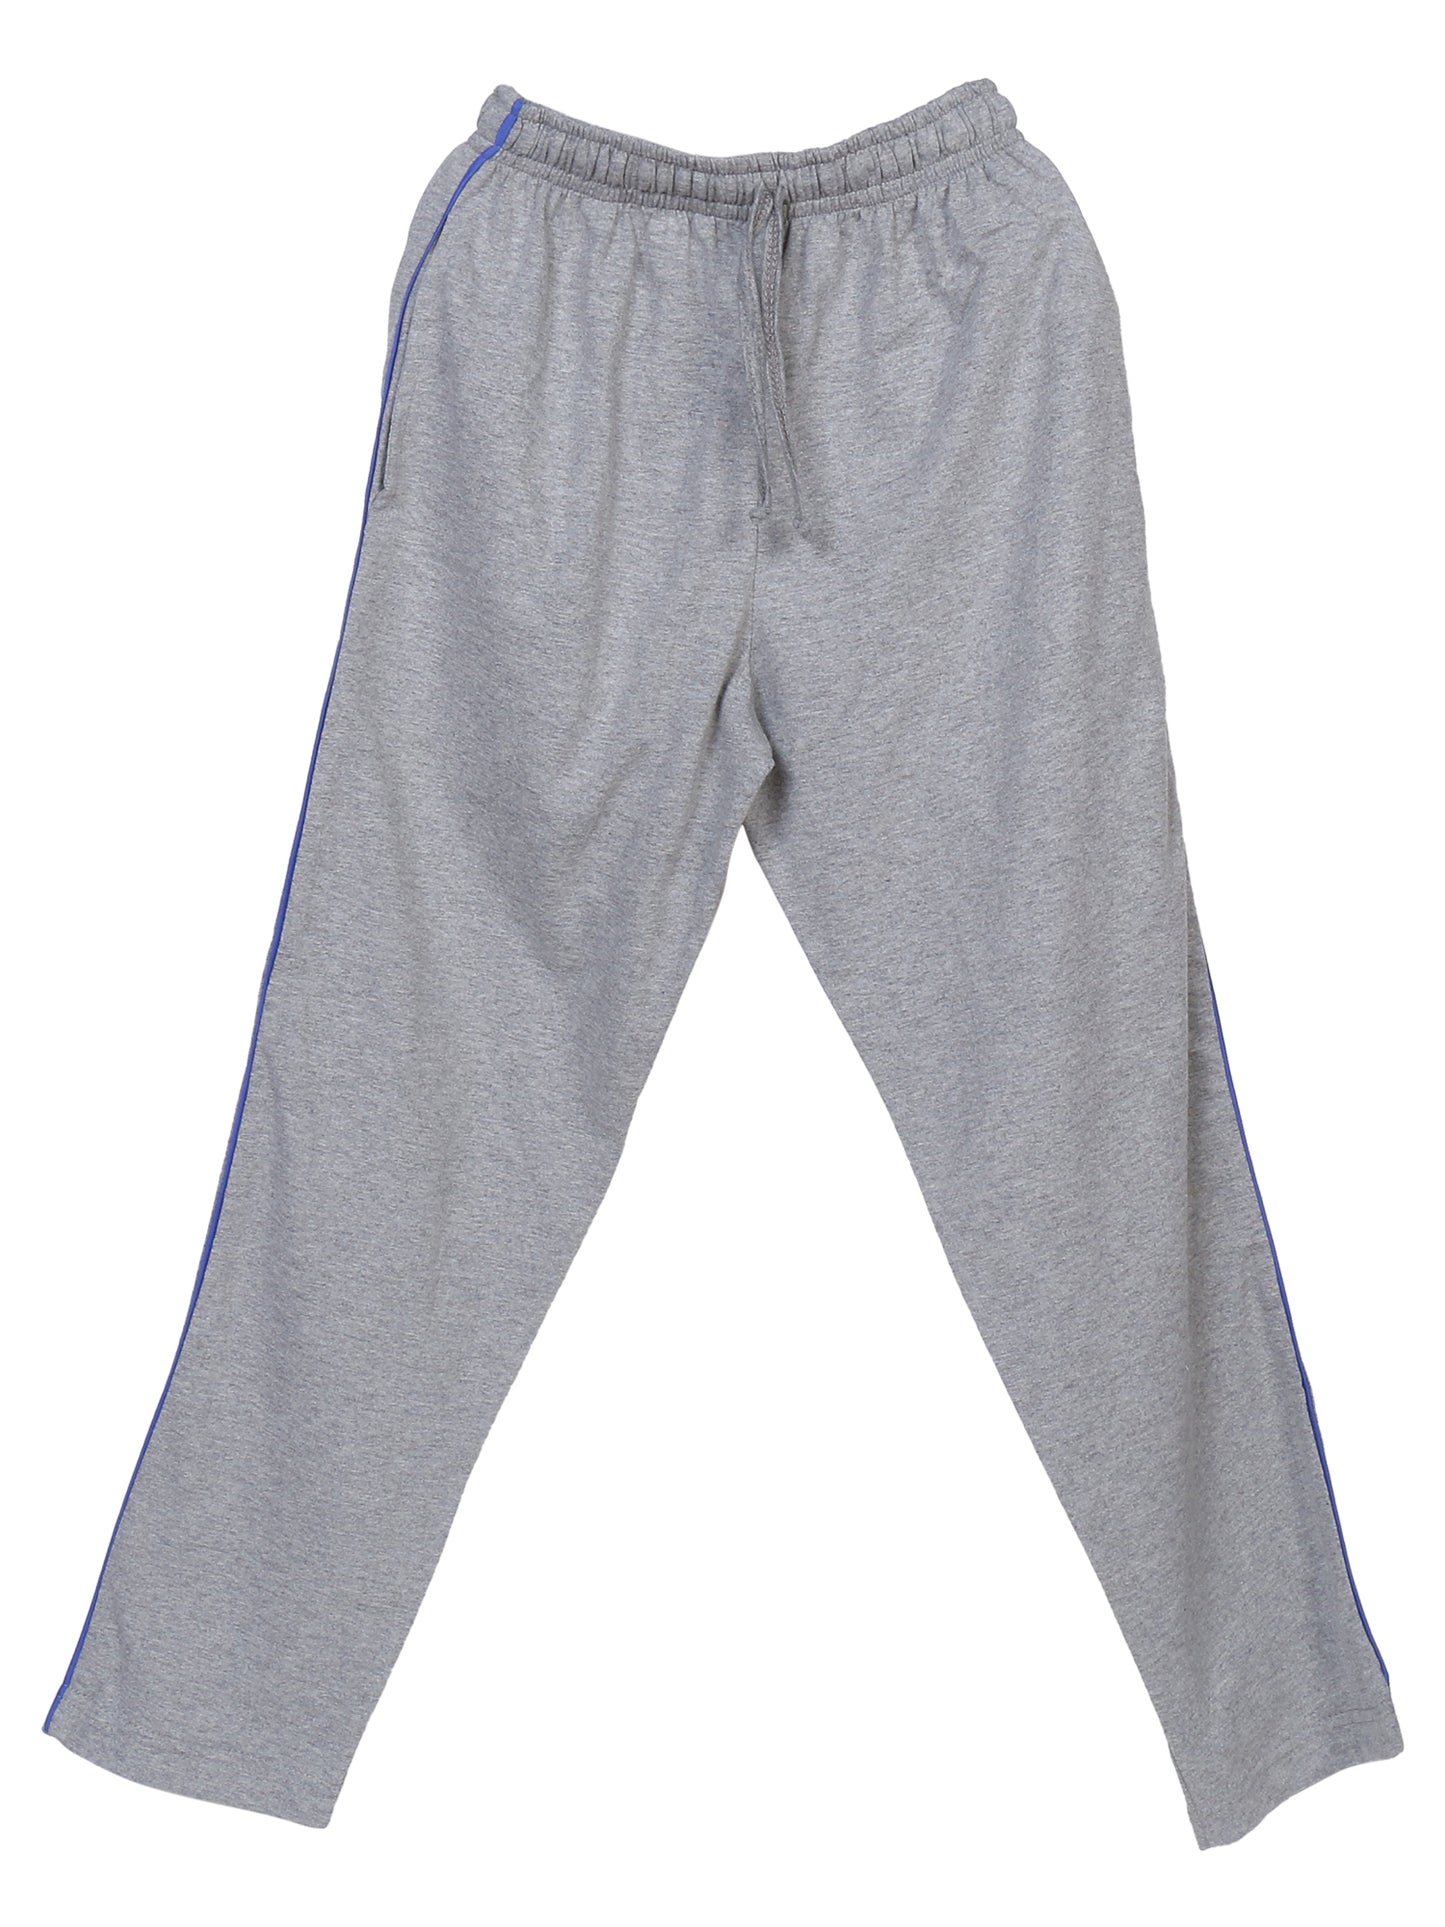 Neo Garments Boy's Cotton Track Pant | GREY | SIZE FROM 1YRS TO 15YRS.